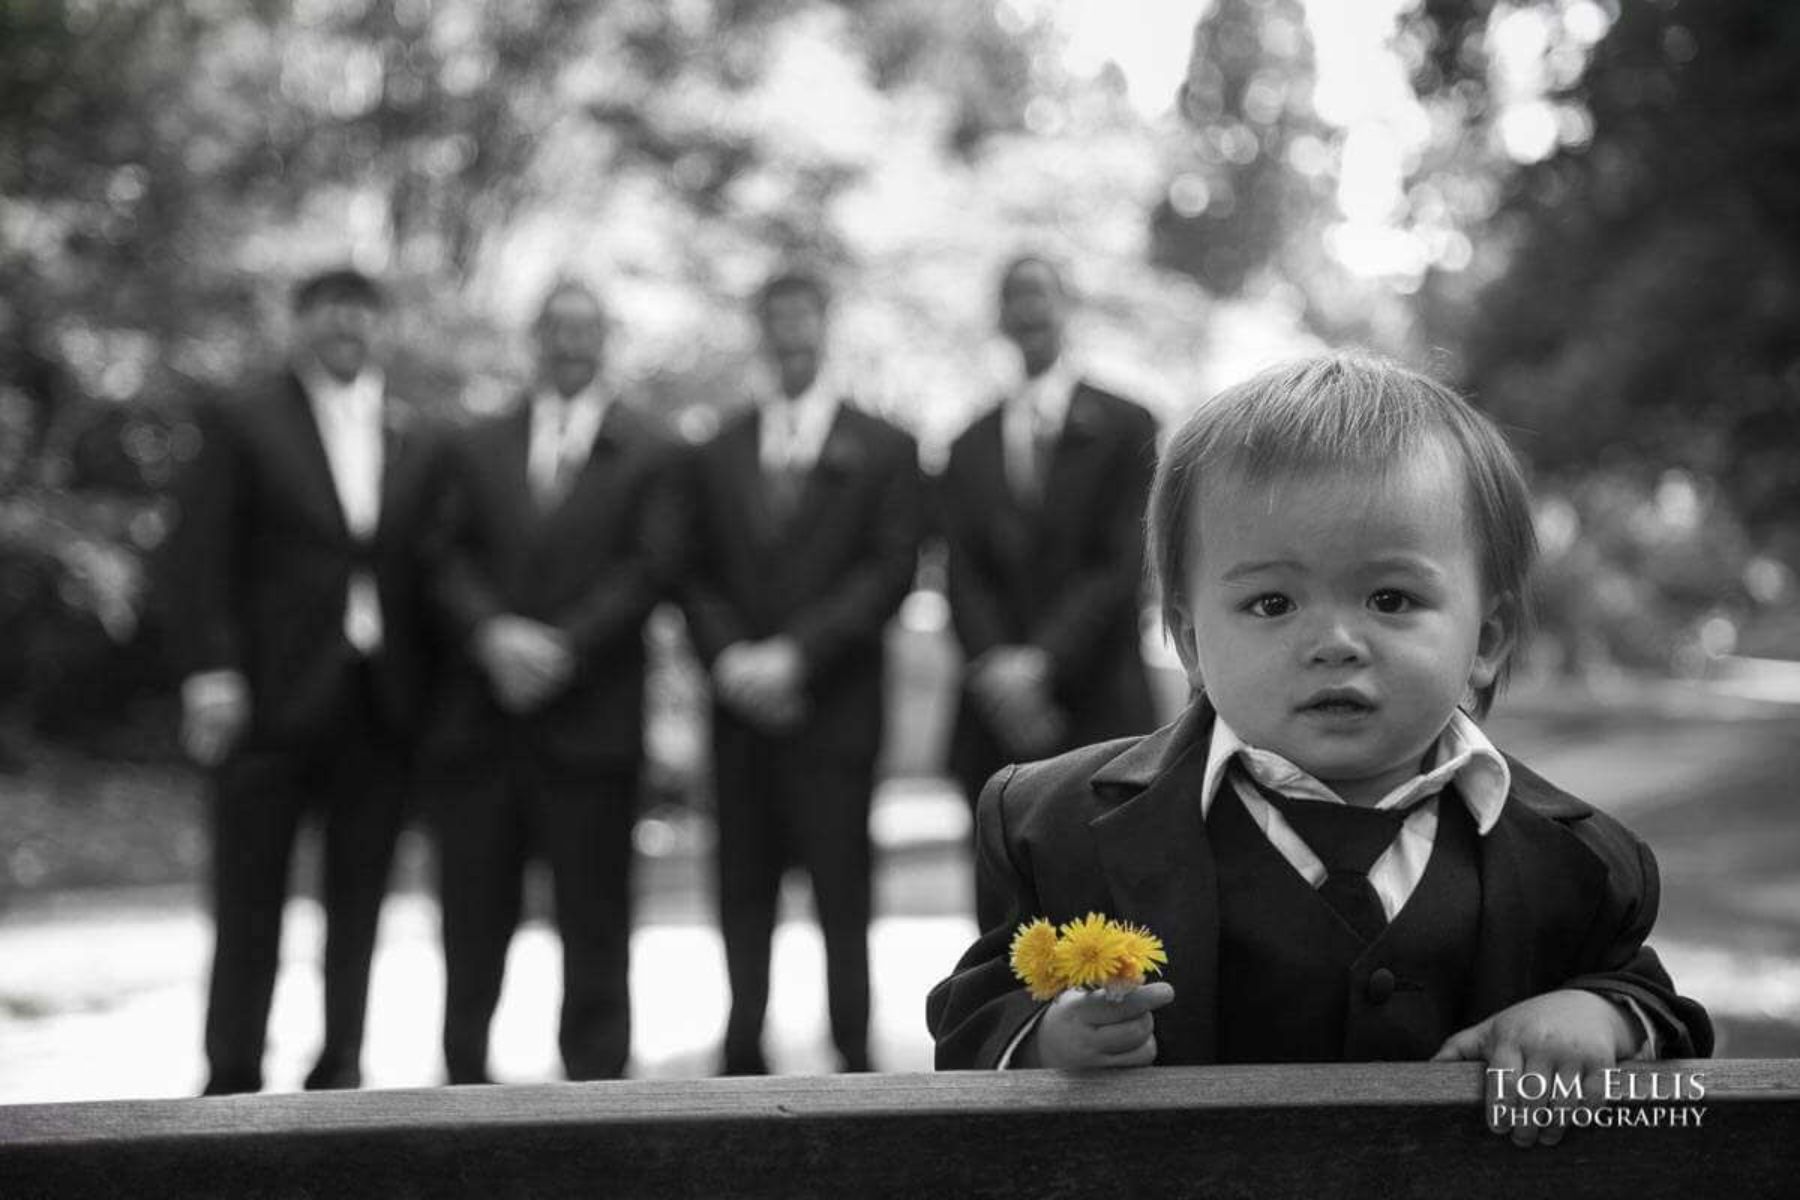 Young boy holding flowers with groomsmen in background